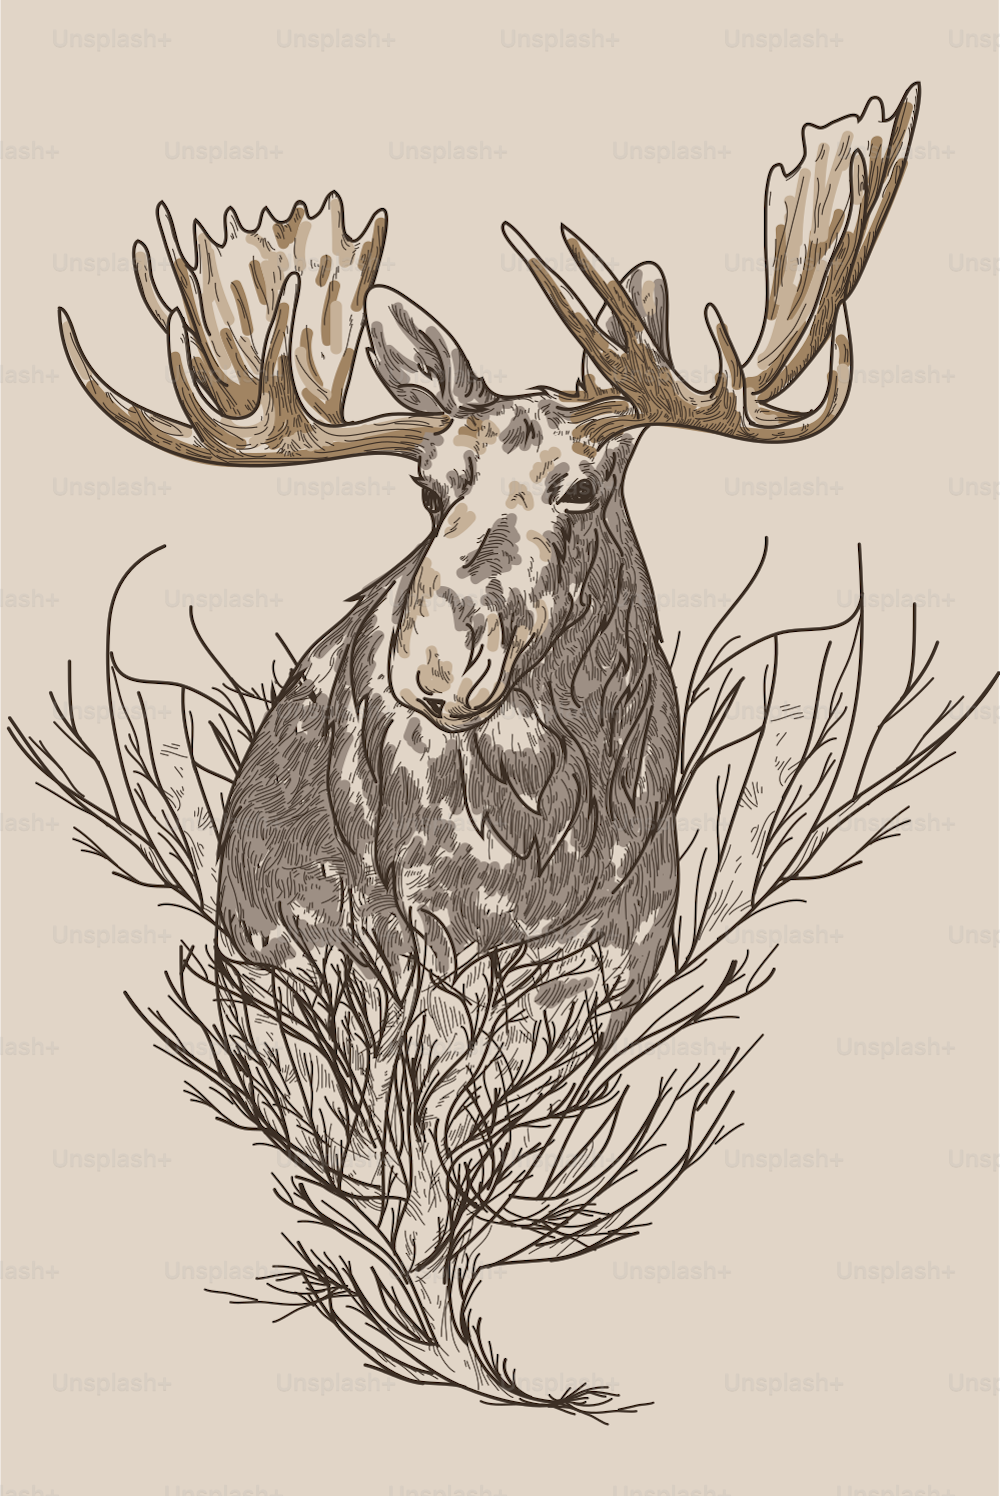 Moose illustration merged with leafless tree branches.